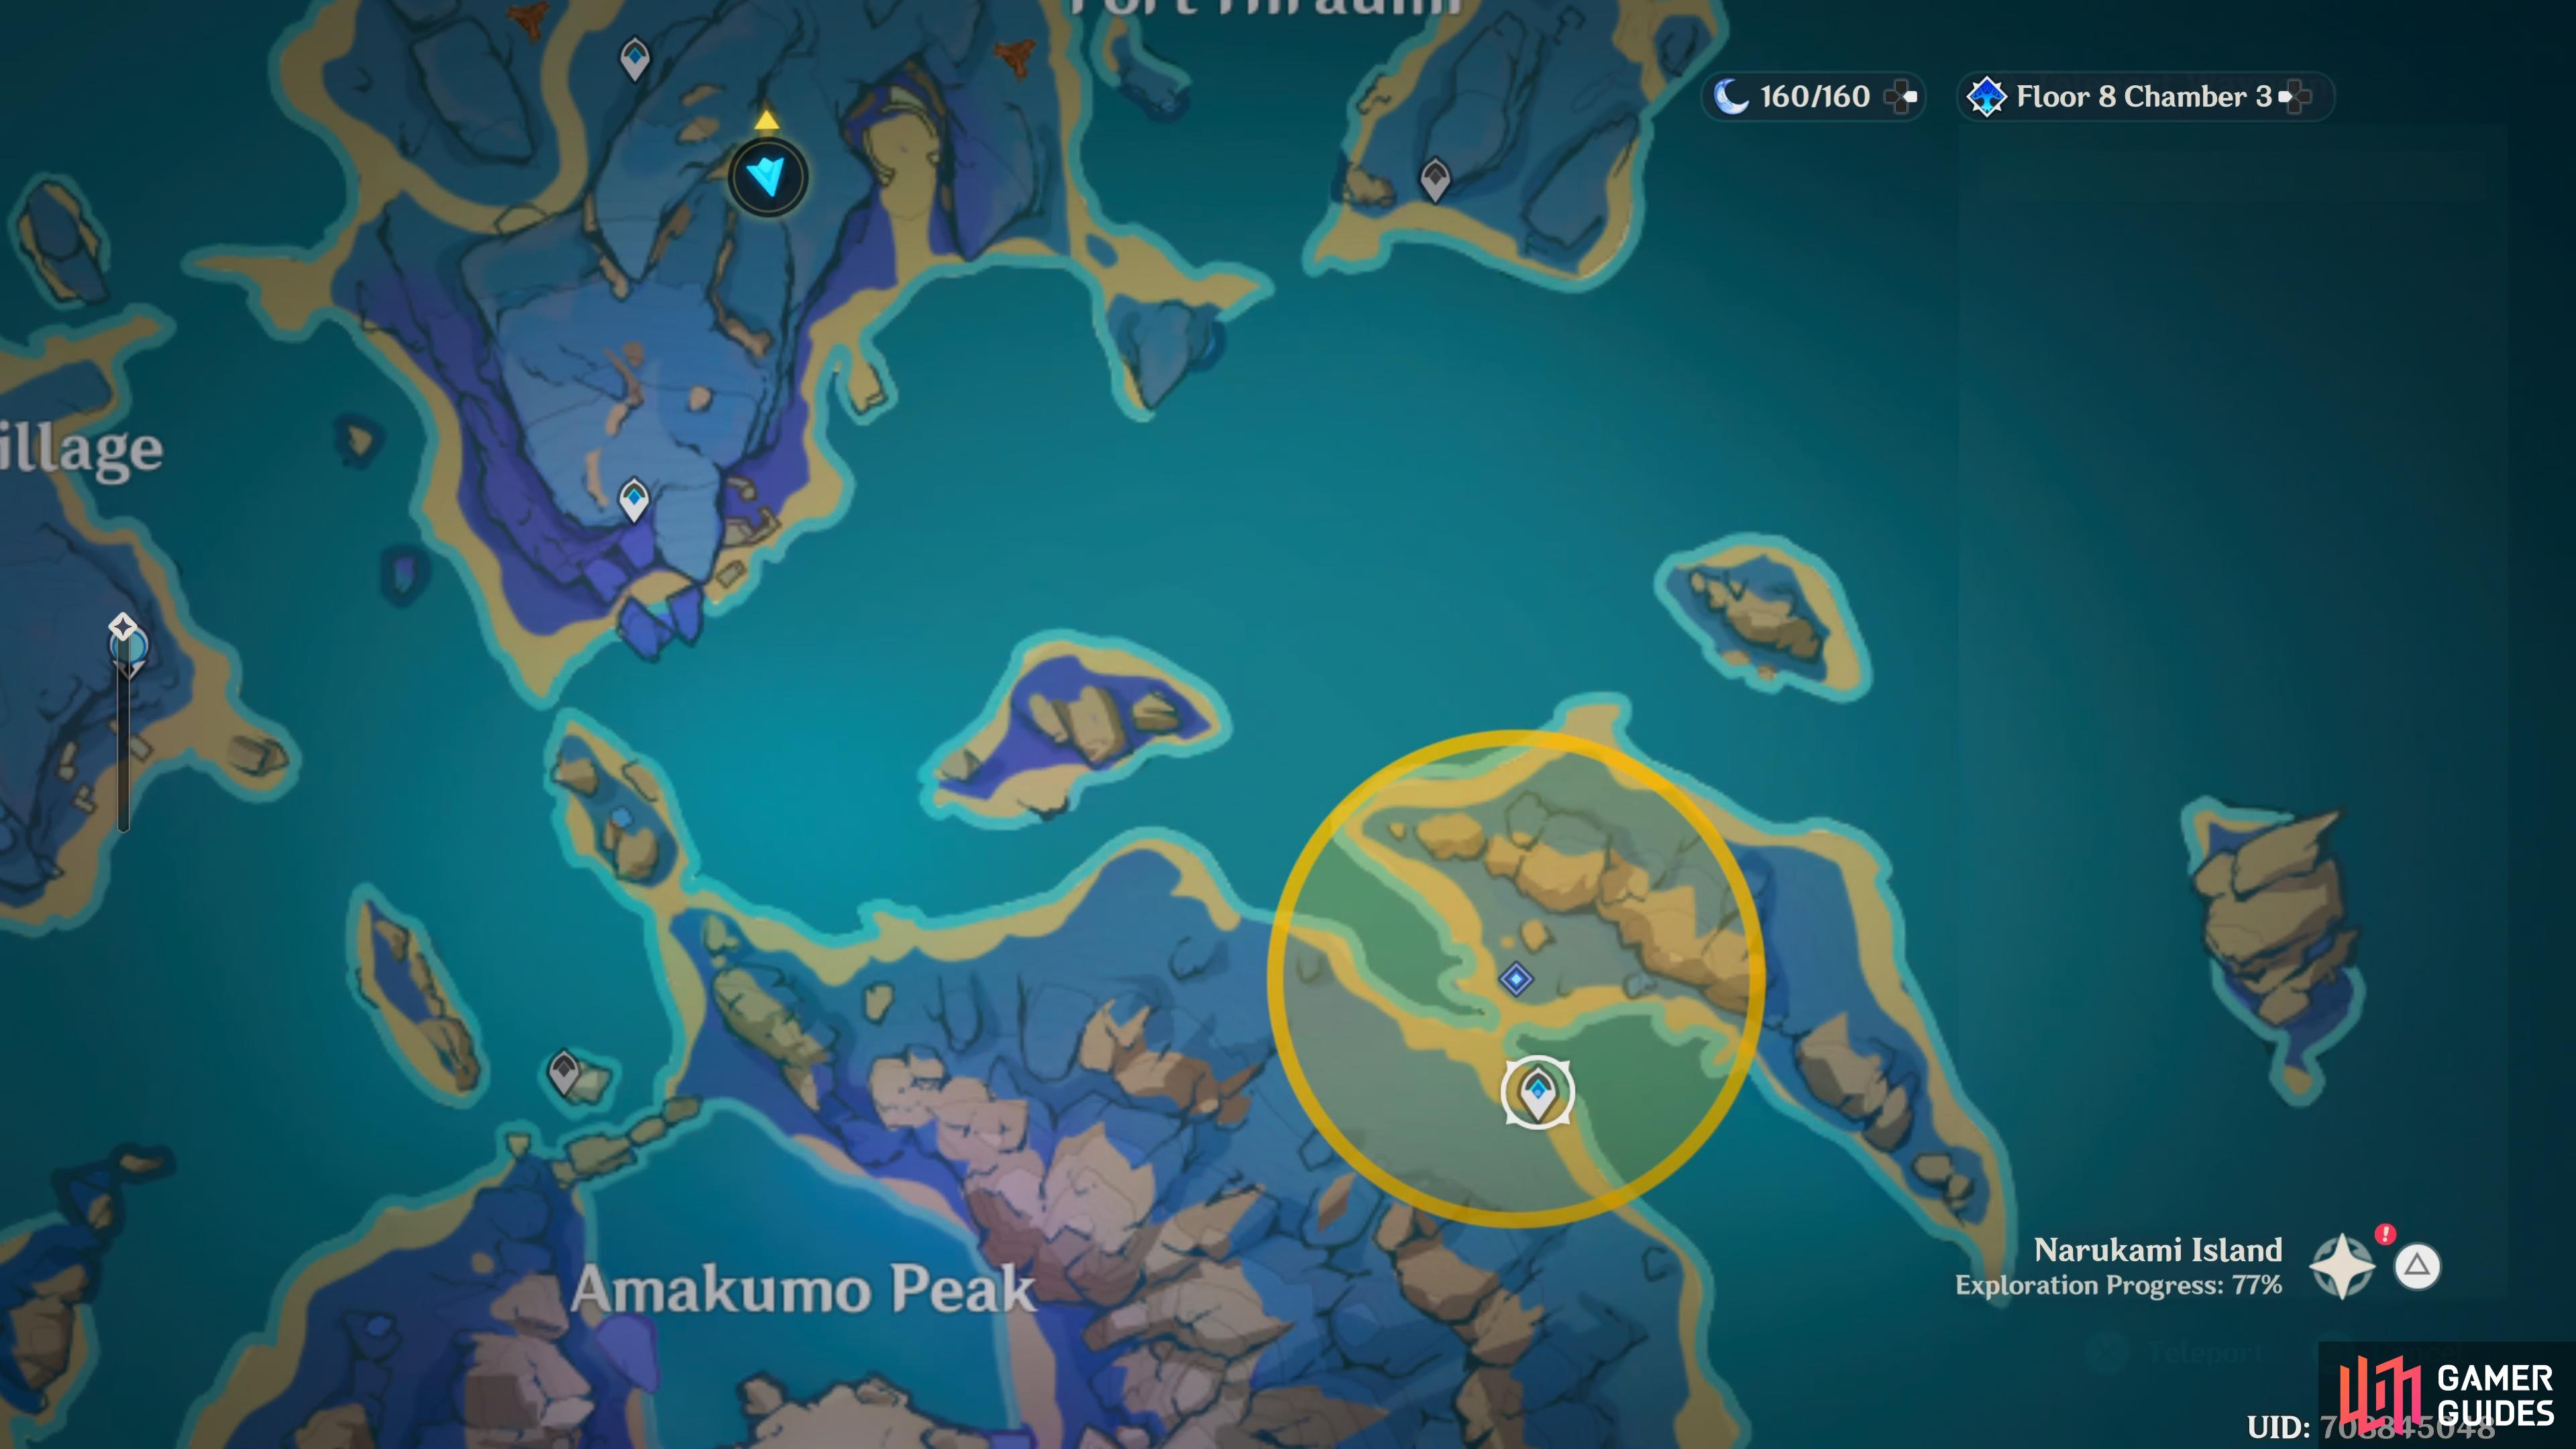 The second warding stone can be found northeast of Seirai Island. It can be seen just in front of the teleport waypoint.